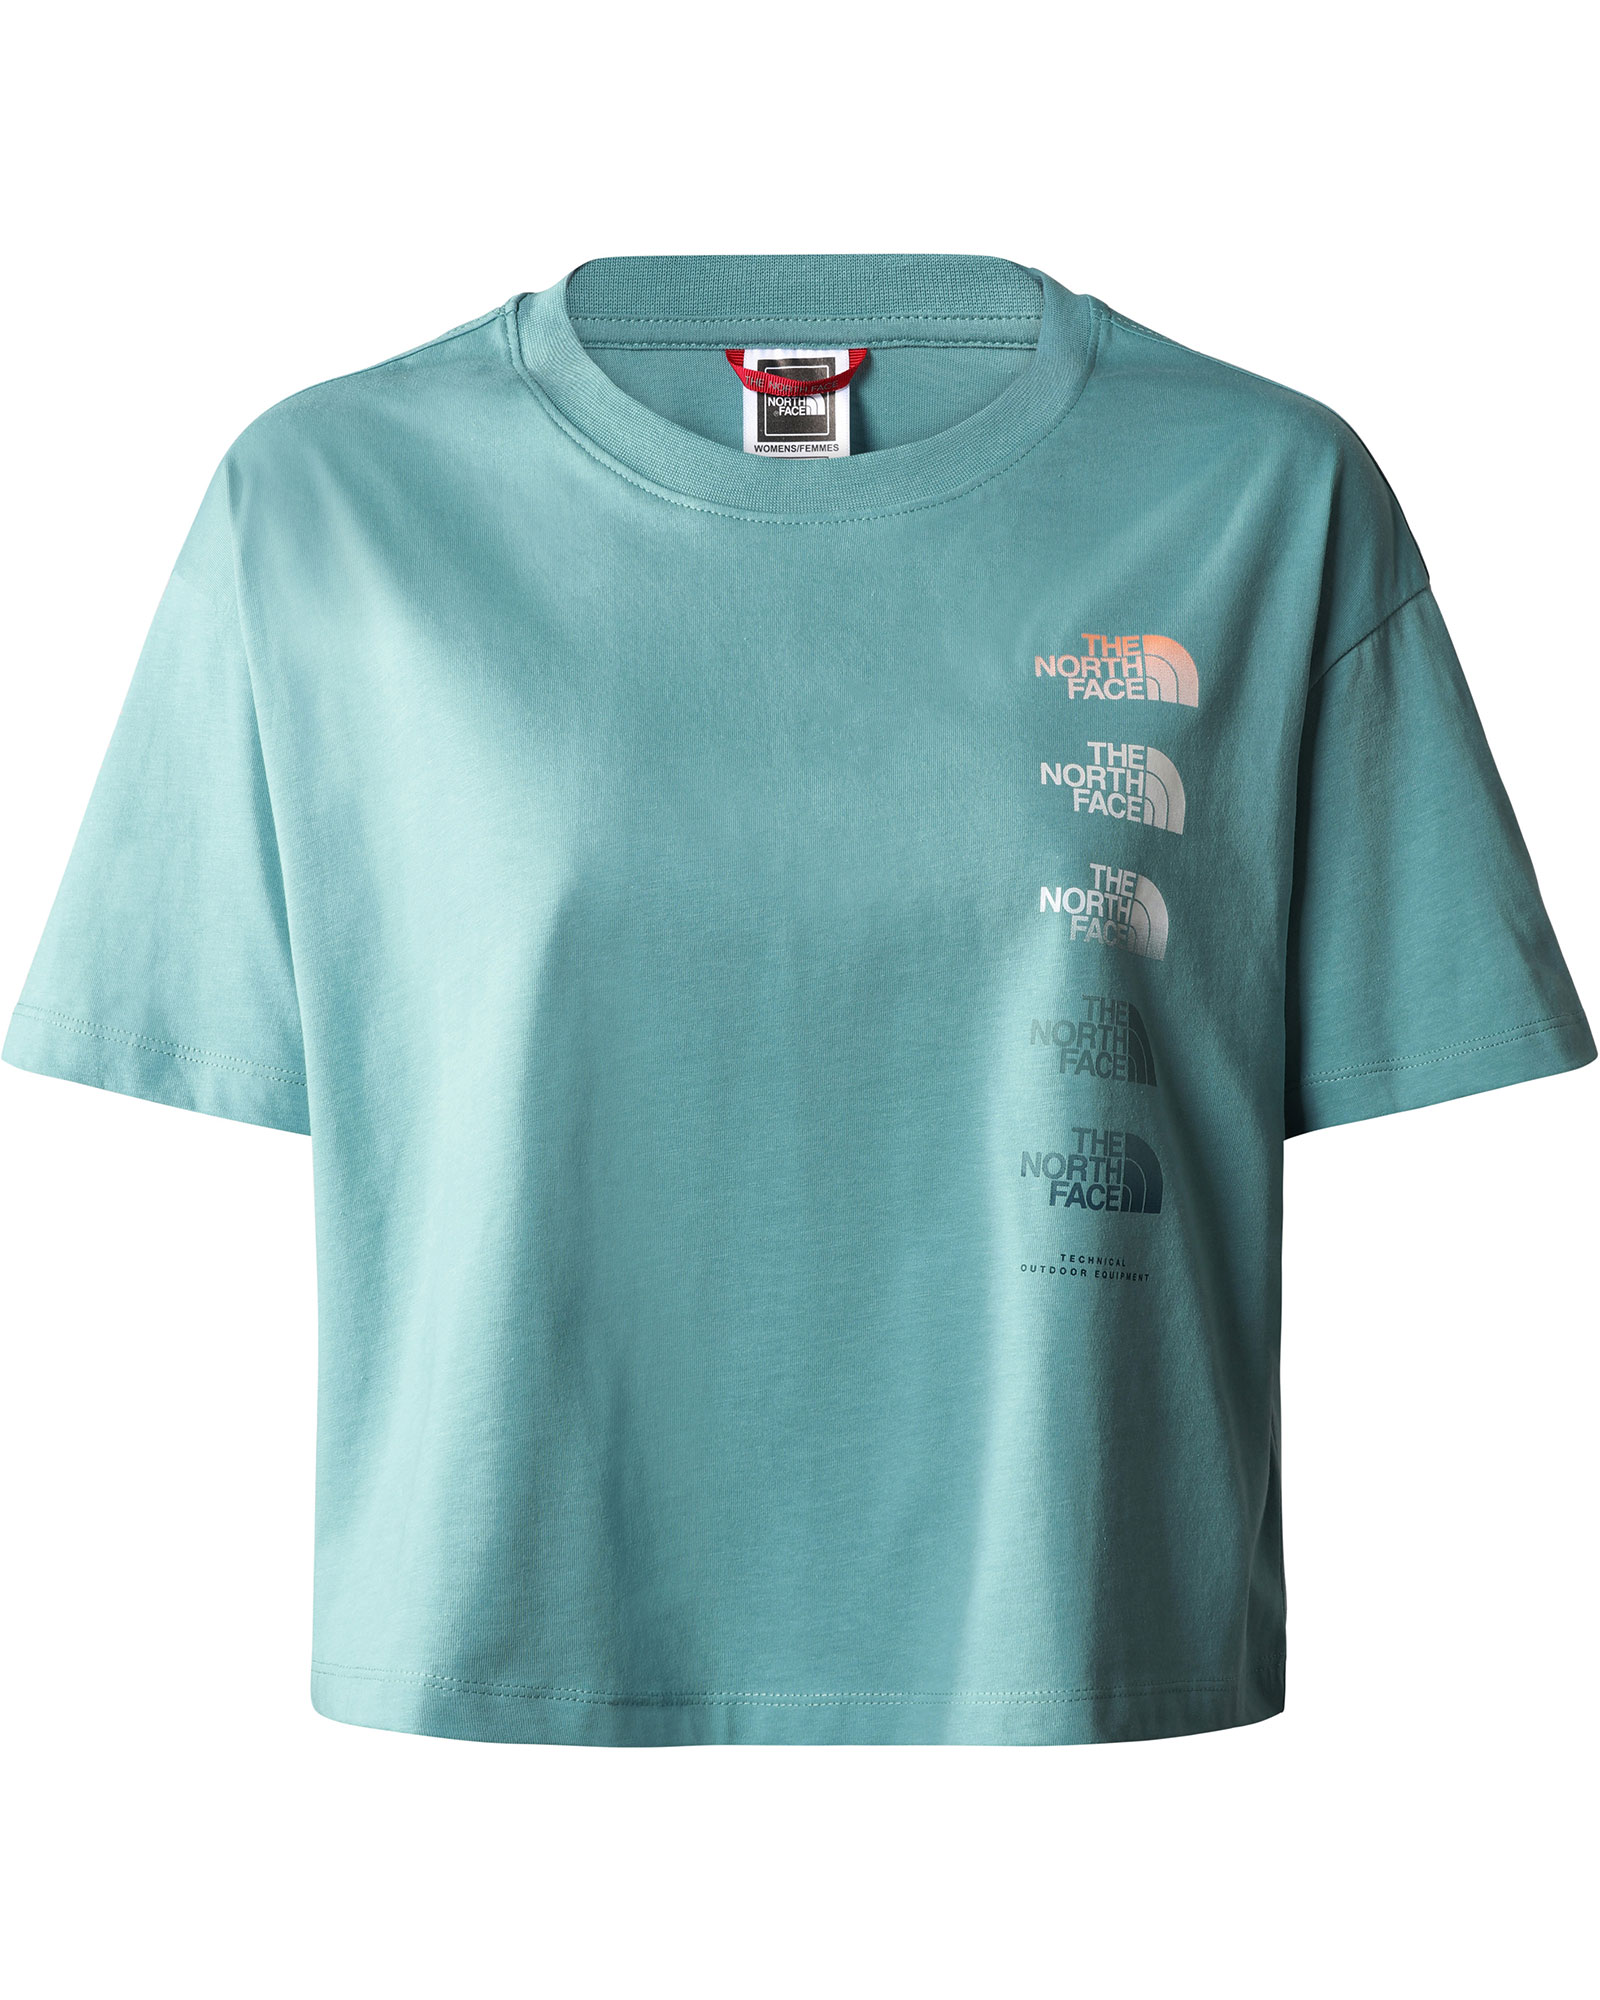 The North Face Women’s D2 Graphic Crop T Shirt - Reef Waters XL